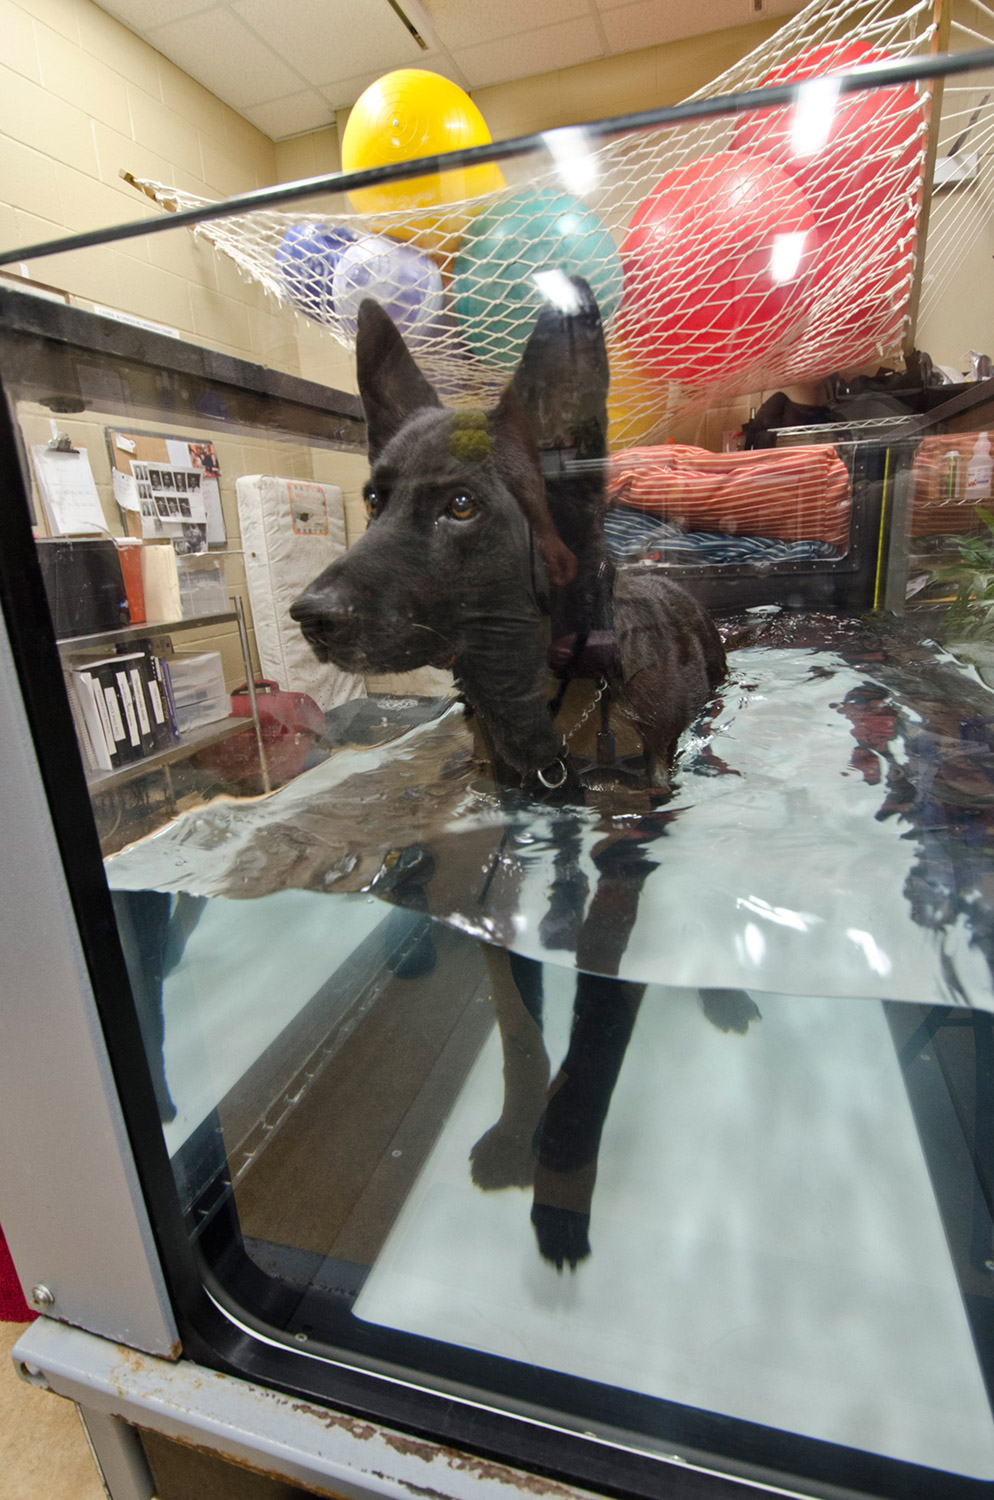 Maci, a retired military dog, enjoys walking on the aquatic treadmill as part of physical therapy he receives at Mississippi State University’s College of Veterinary Medicine. Photo by Tom Thompson